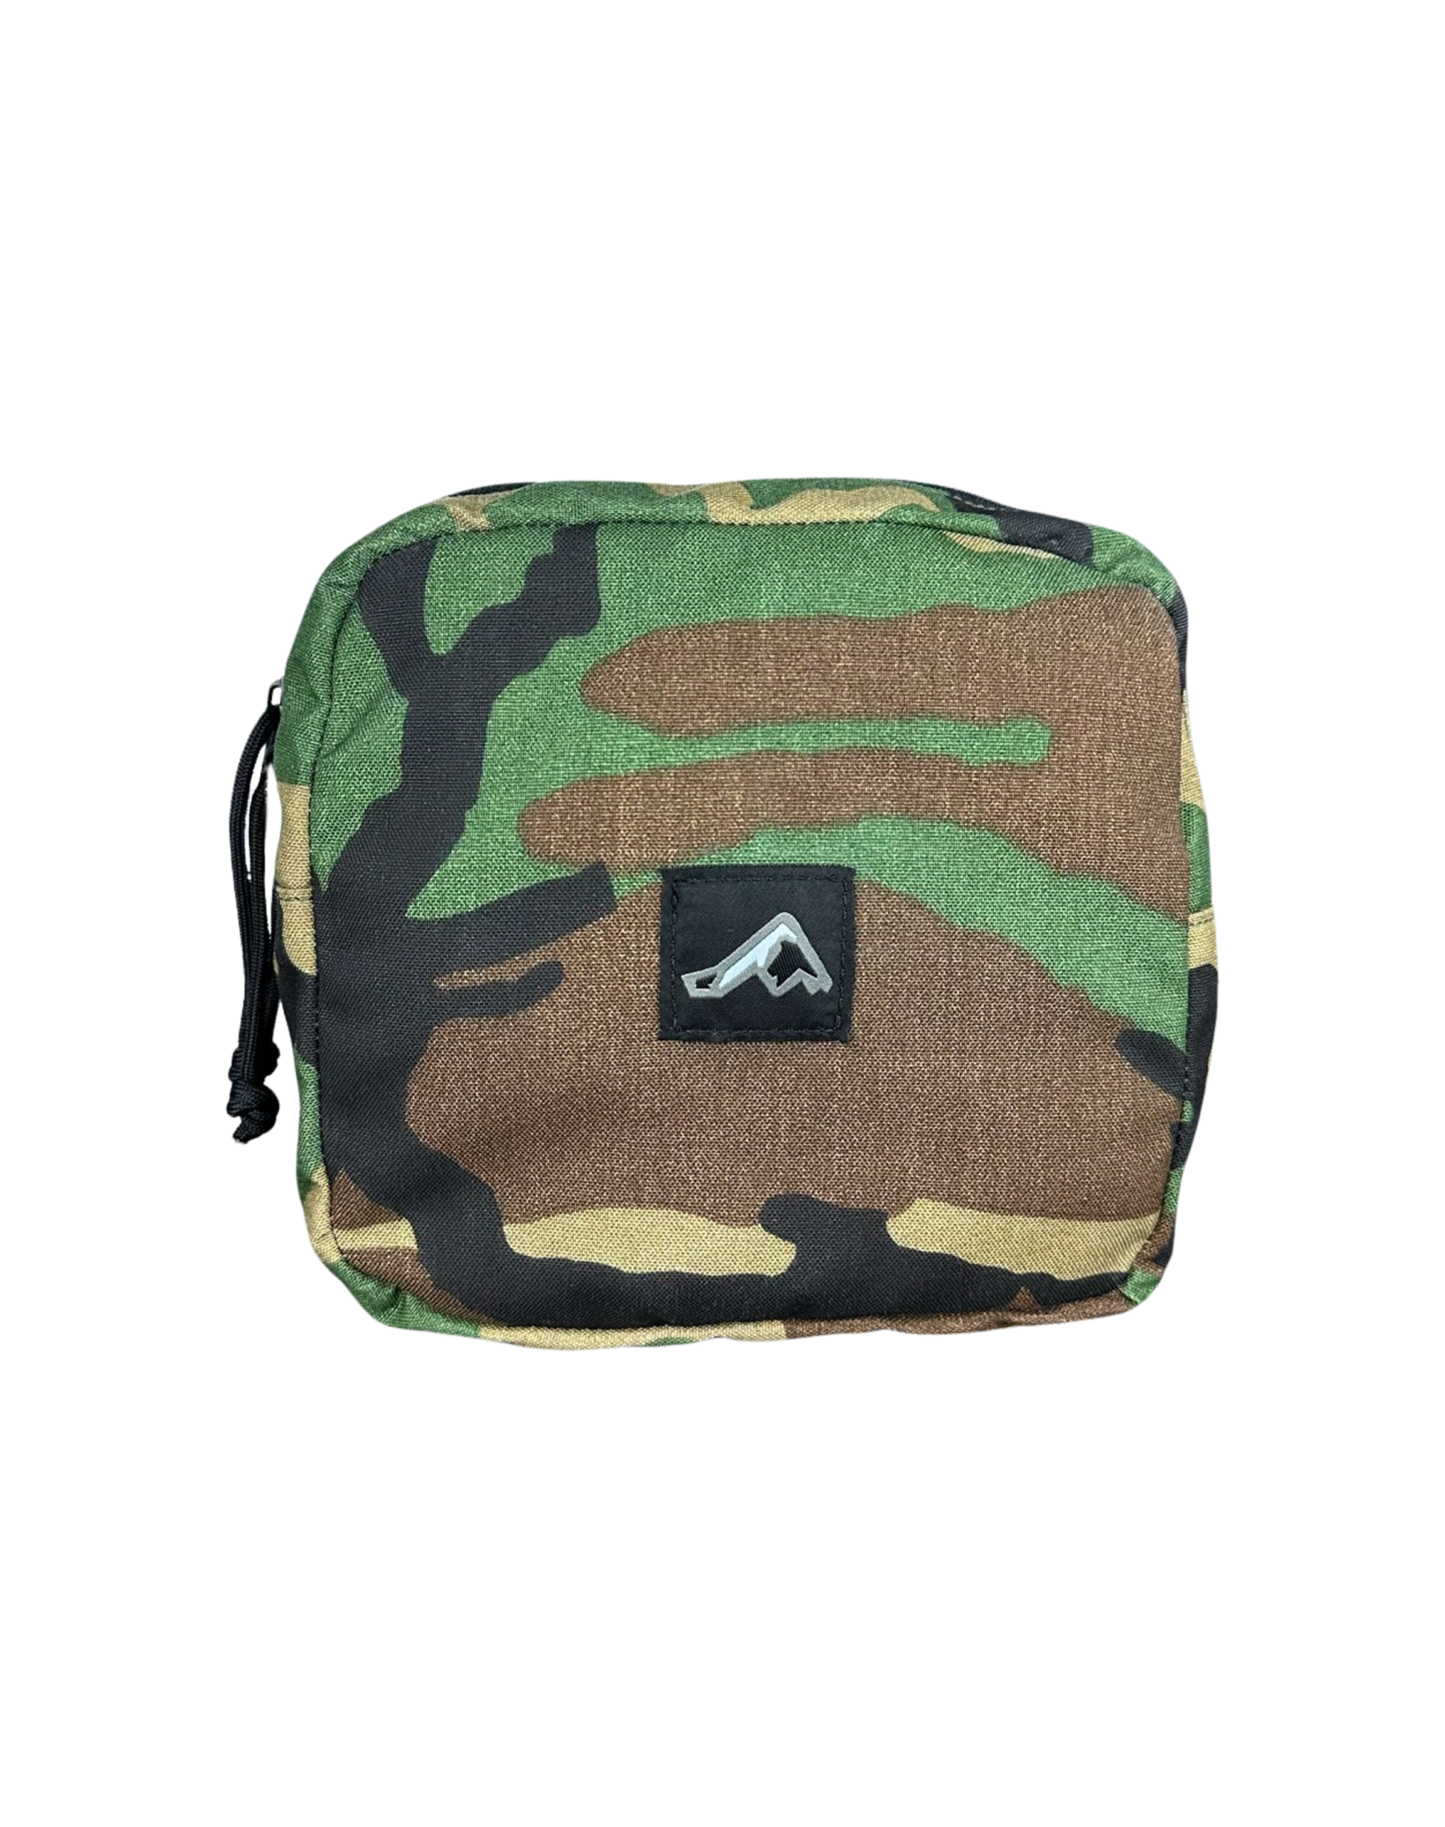 M81 Woodland Camo field pouch general purpose MOLLE pouch modular pouch